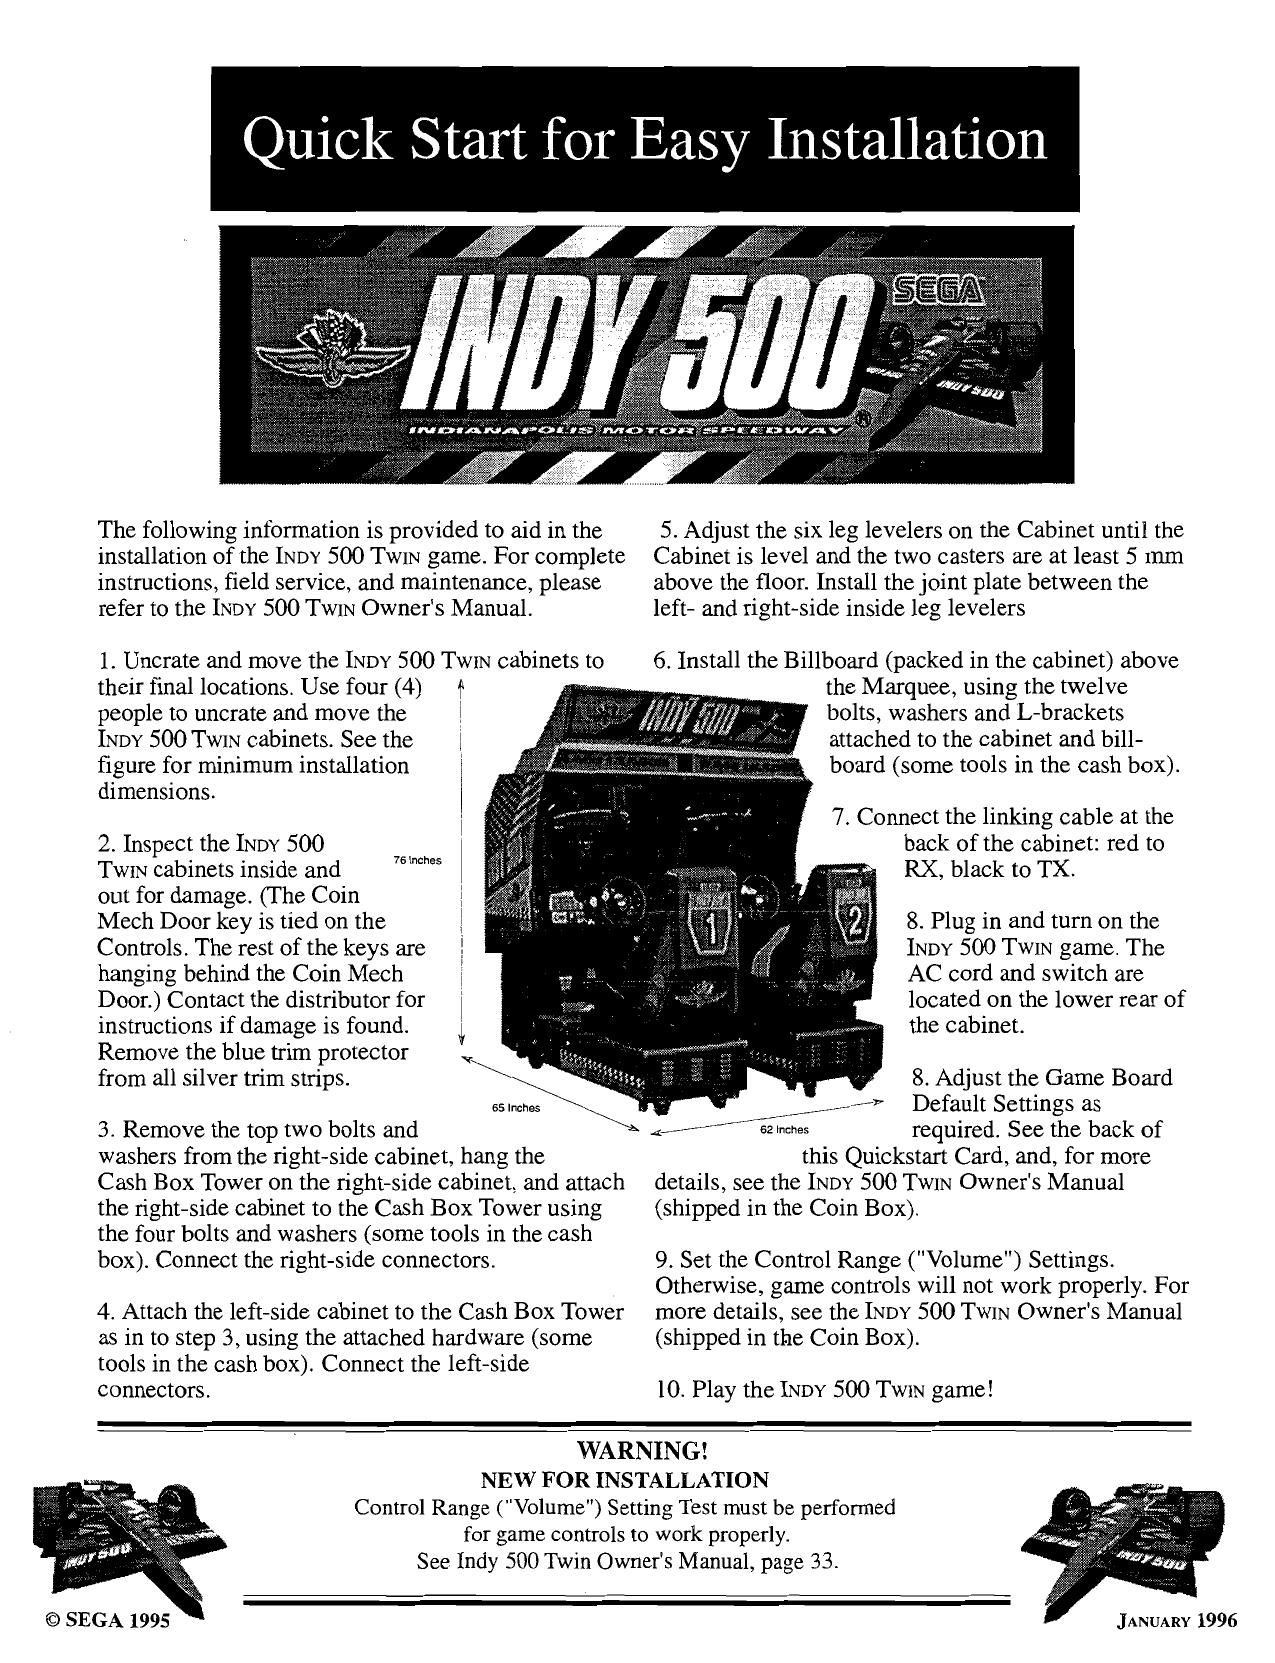 Indy 500 Twin Quick Start Guide